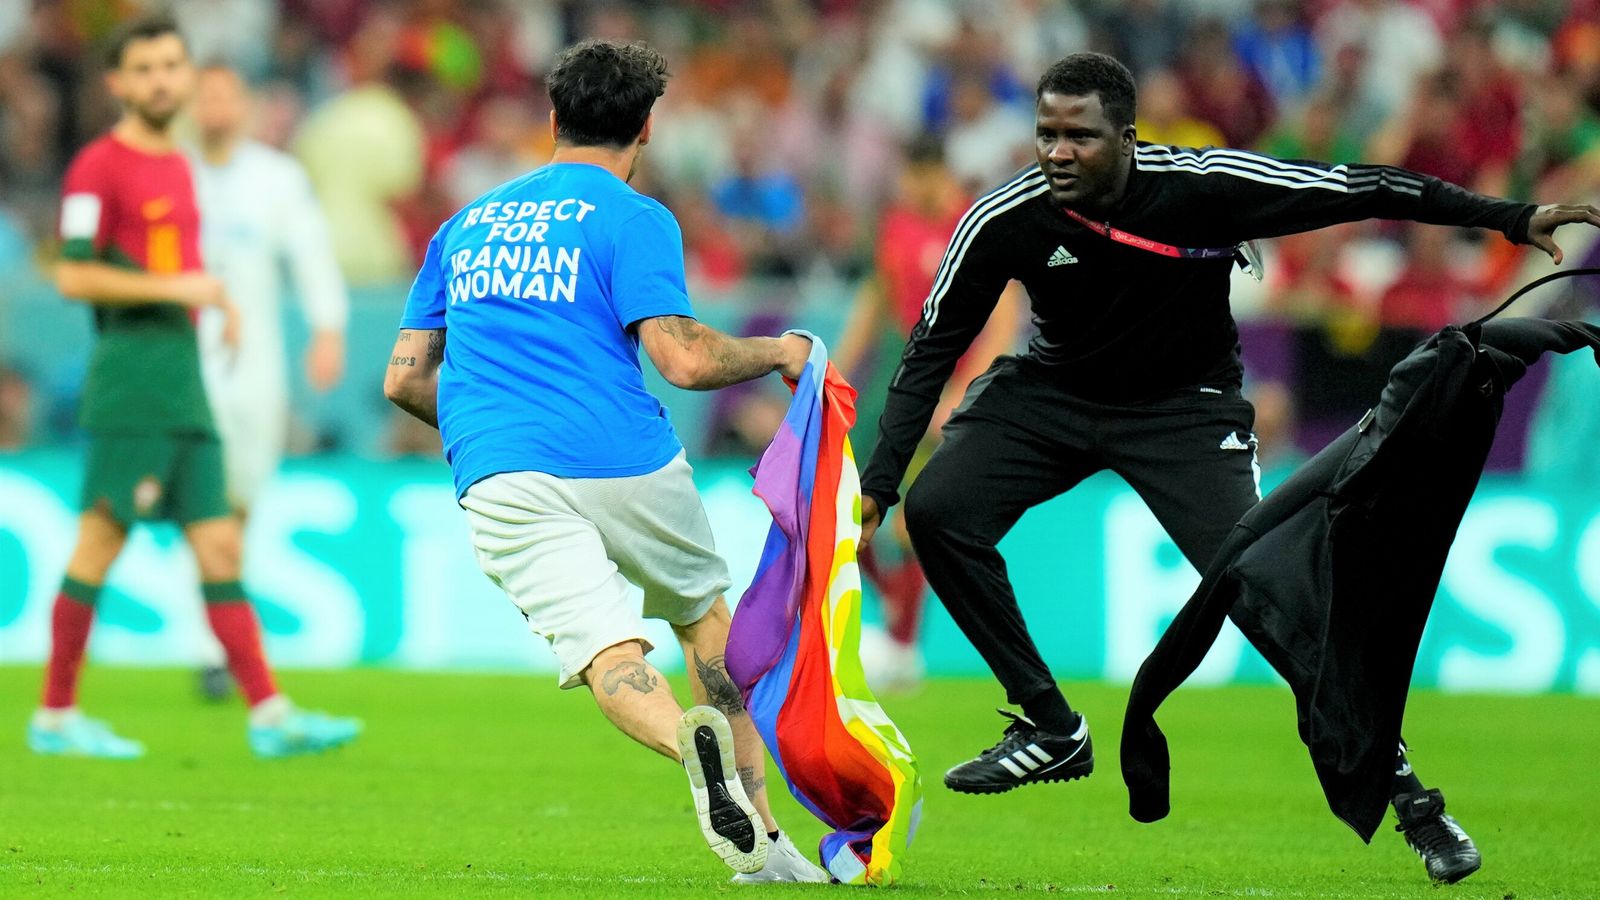 World Cup pitch invader carries rainbow flag onto grass during Portugal vs Uruguay